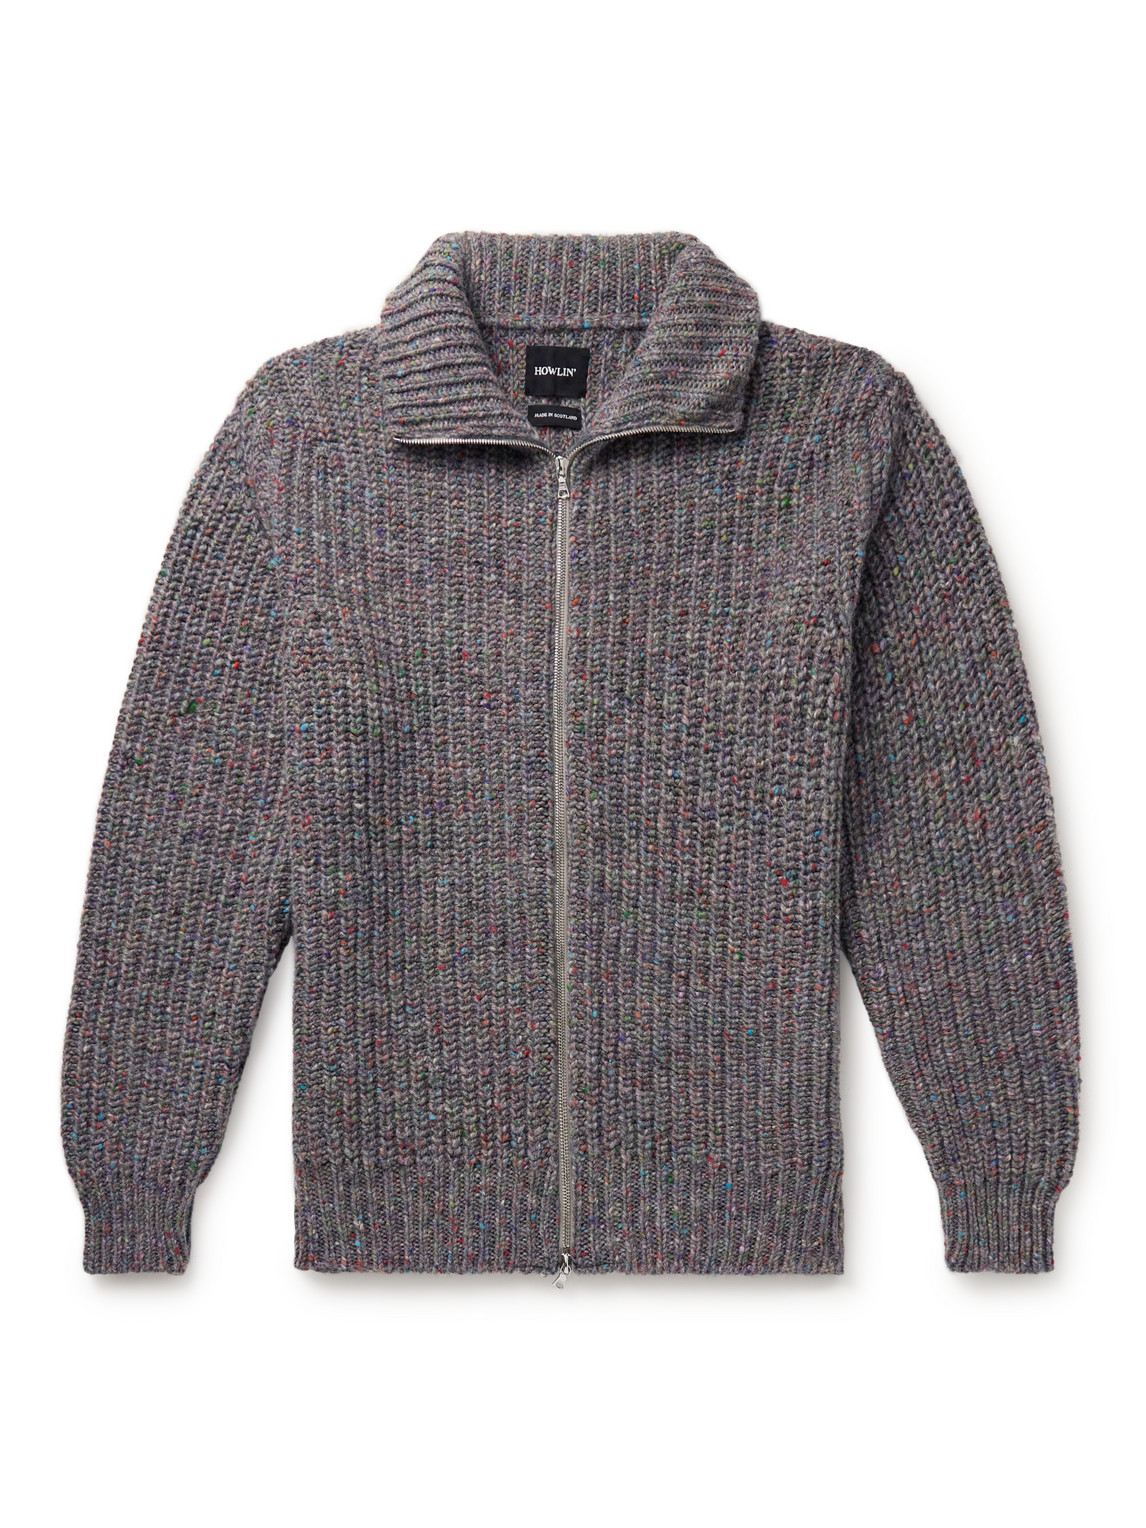 Howlin' Loose Ends Ribbed Donegal Wool Zip-up Cardigan In Gray